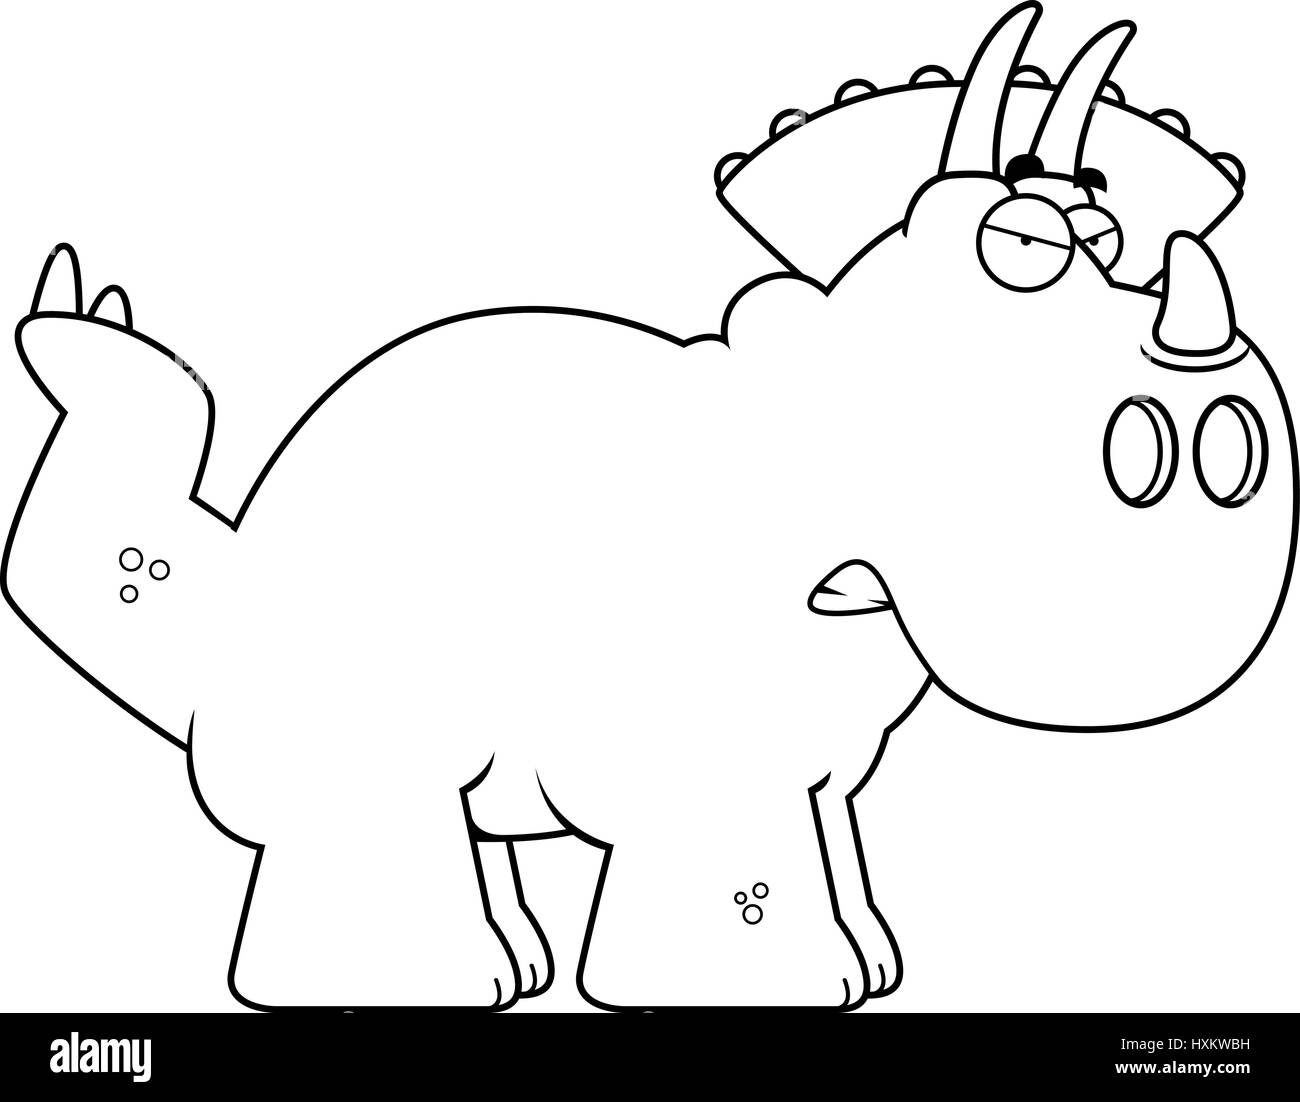 A cartoon illustration of a Triceratops dinosaur looking angry. Stock Vector